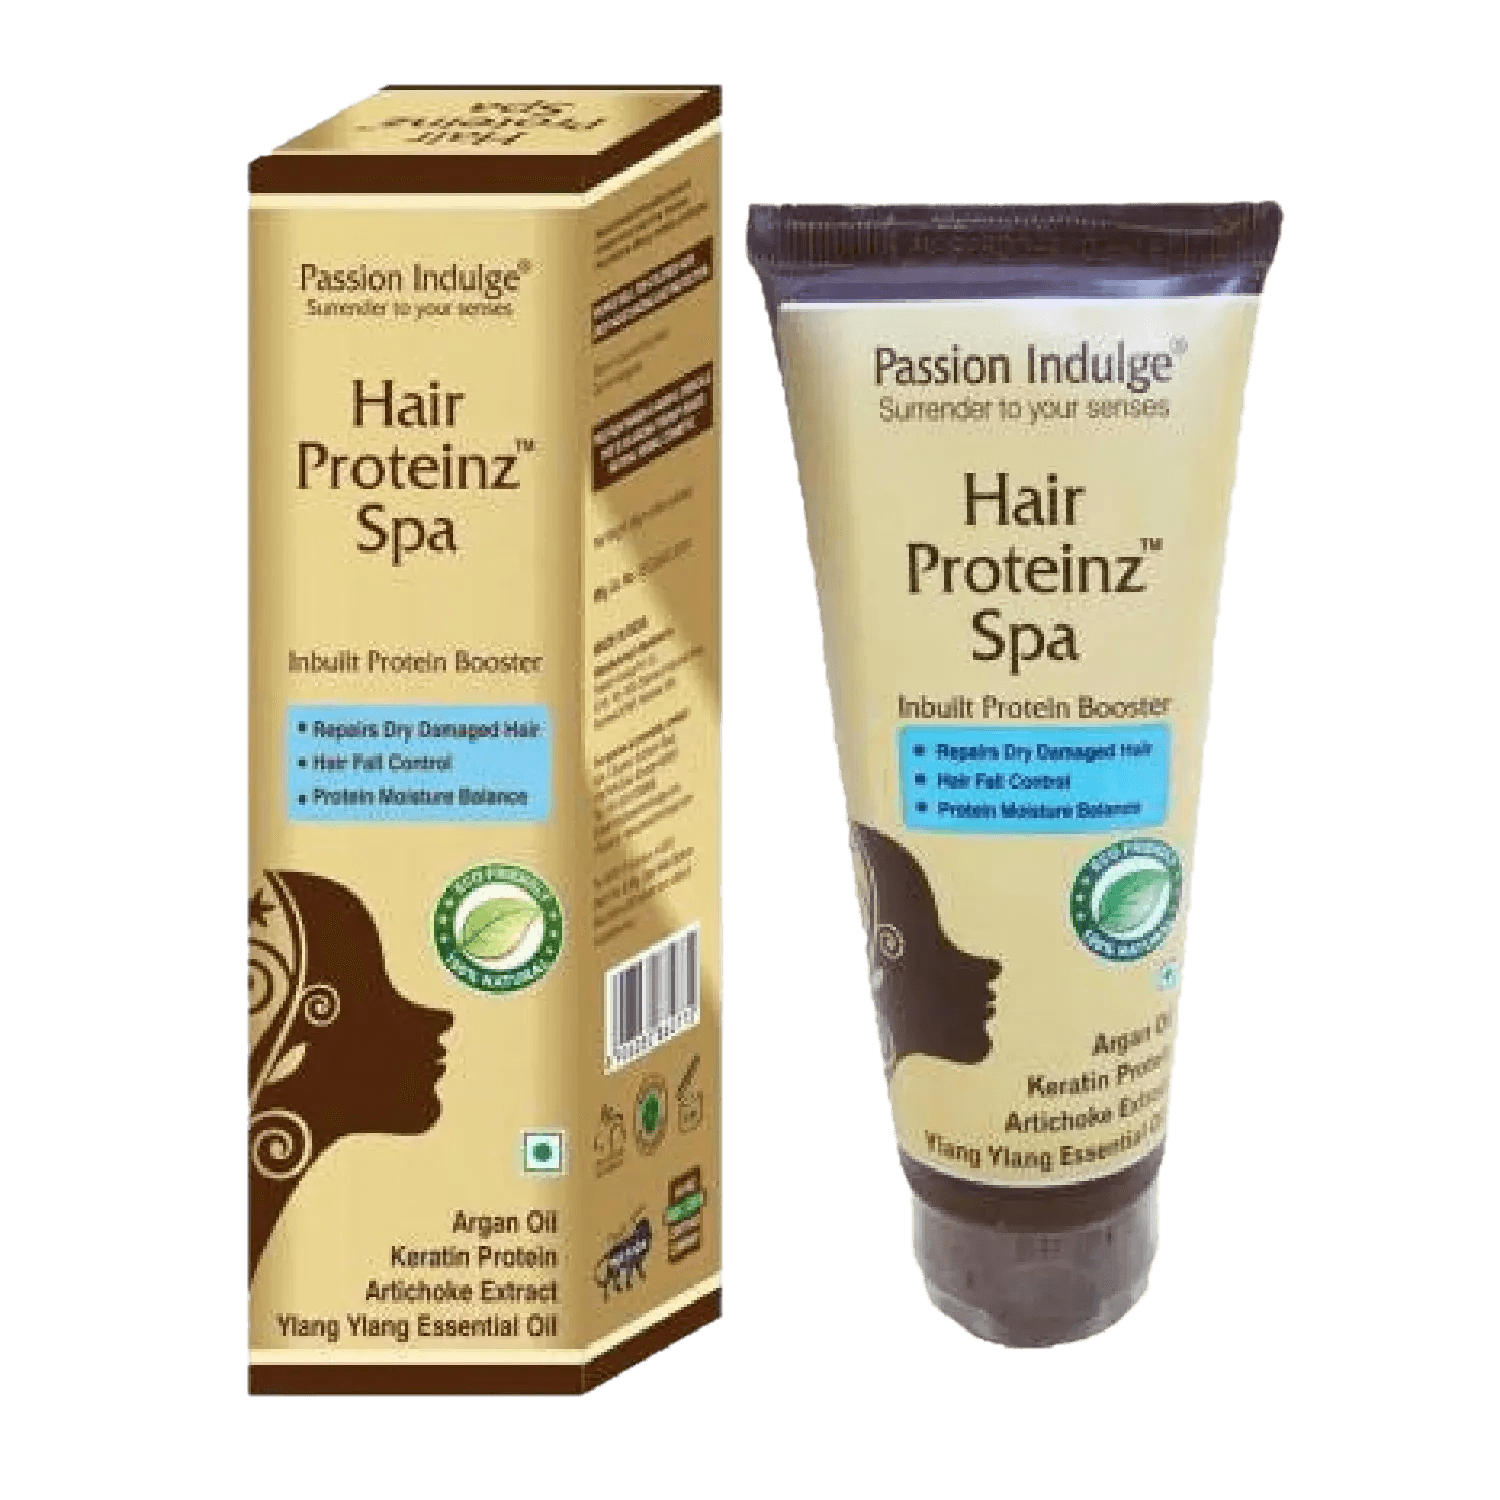 Passion Indulge | Passion Indulge Hair Proteinz Spa (100g)